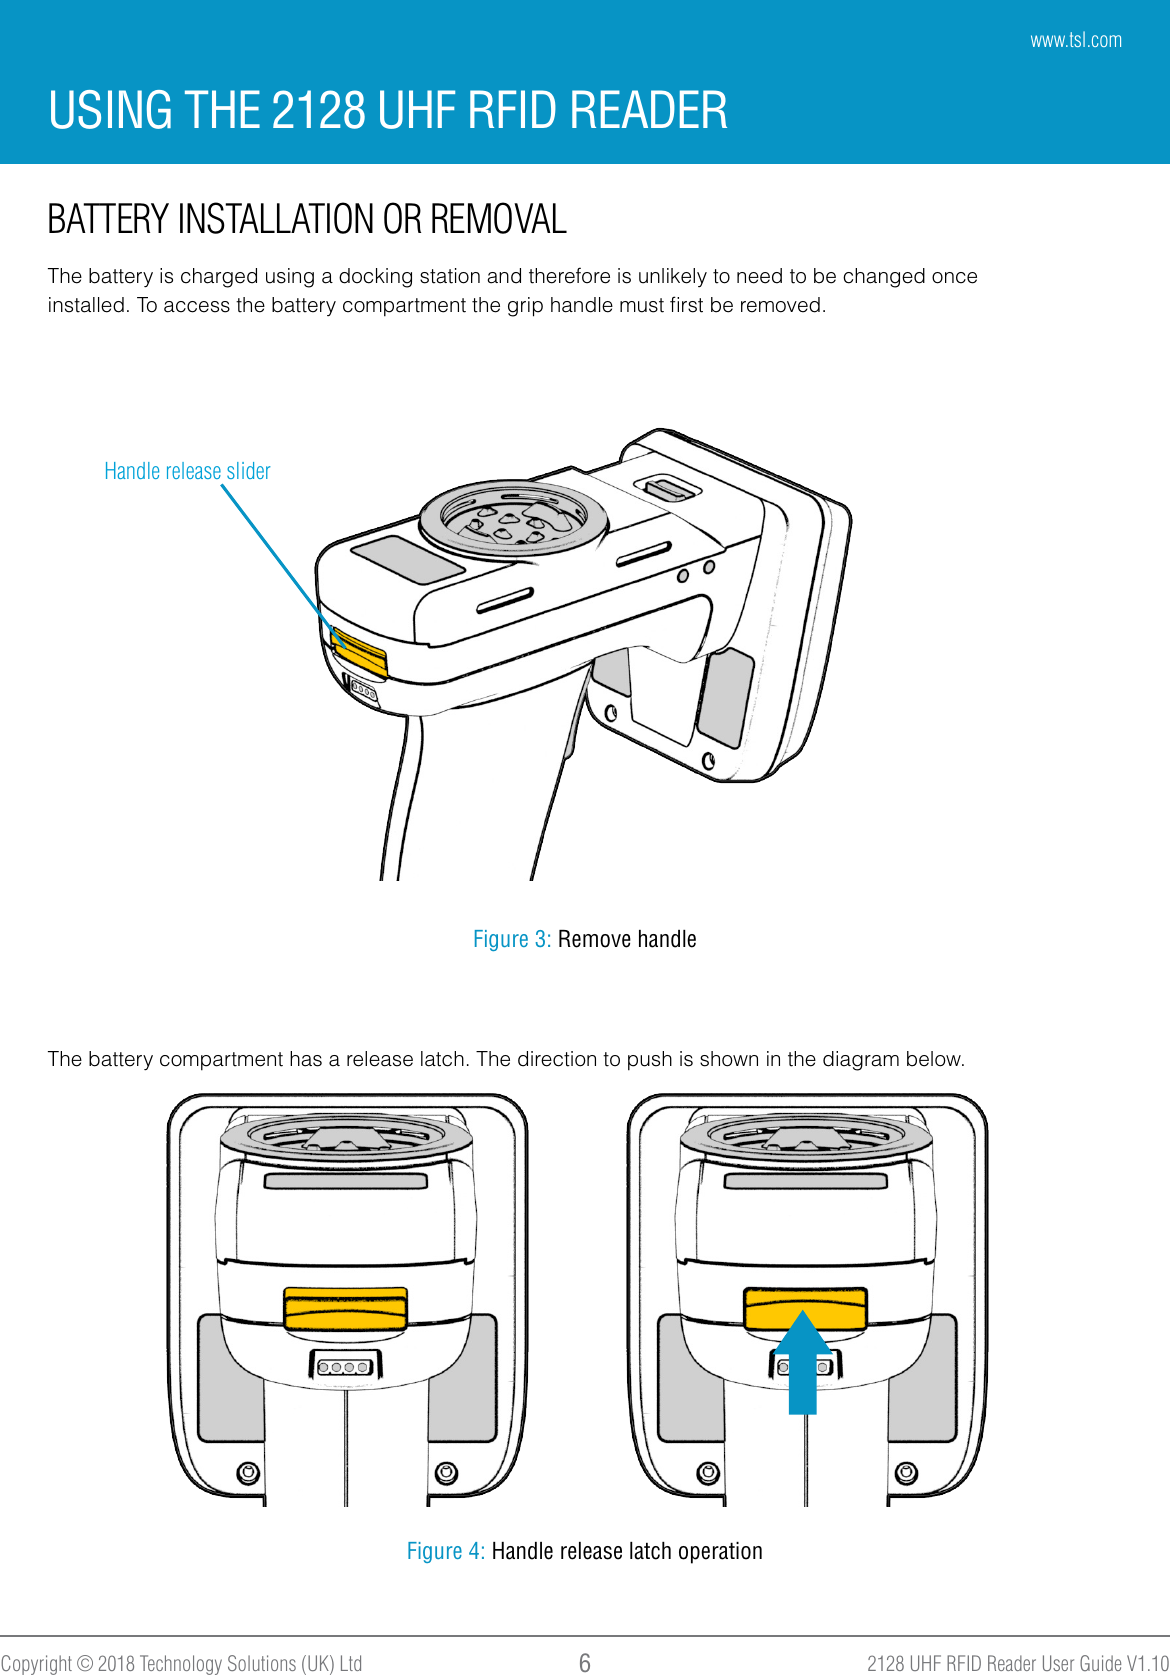 2128 UHF RFID Reader User Guide V1.10Copyright © 2018 Technology Solutions (UK) Ltd 6BATTERY INSTALLATION OR REMOVALThe battery is charged using a docking station and therefore is unlikely to need to be changed onceinstalled. To access the battery compartment the grip handle must ﬁrst be removed.Handle release sliderFigure 3: Remove handleThe battery compartment has a release latch. The direction to push is shown in the diagram below.Figure 4: Handle release latch operationUSING THE 2128 UHF RFID READERwww.tsl.com